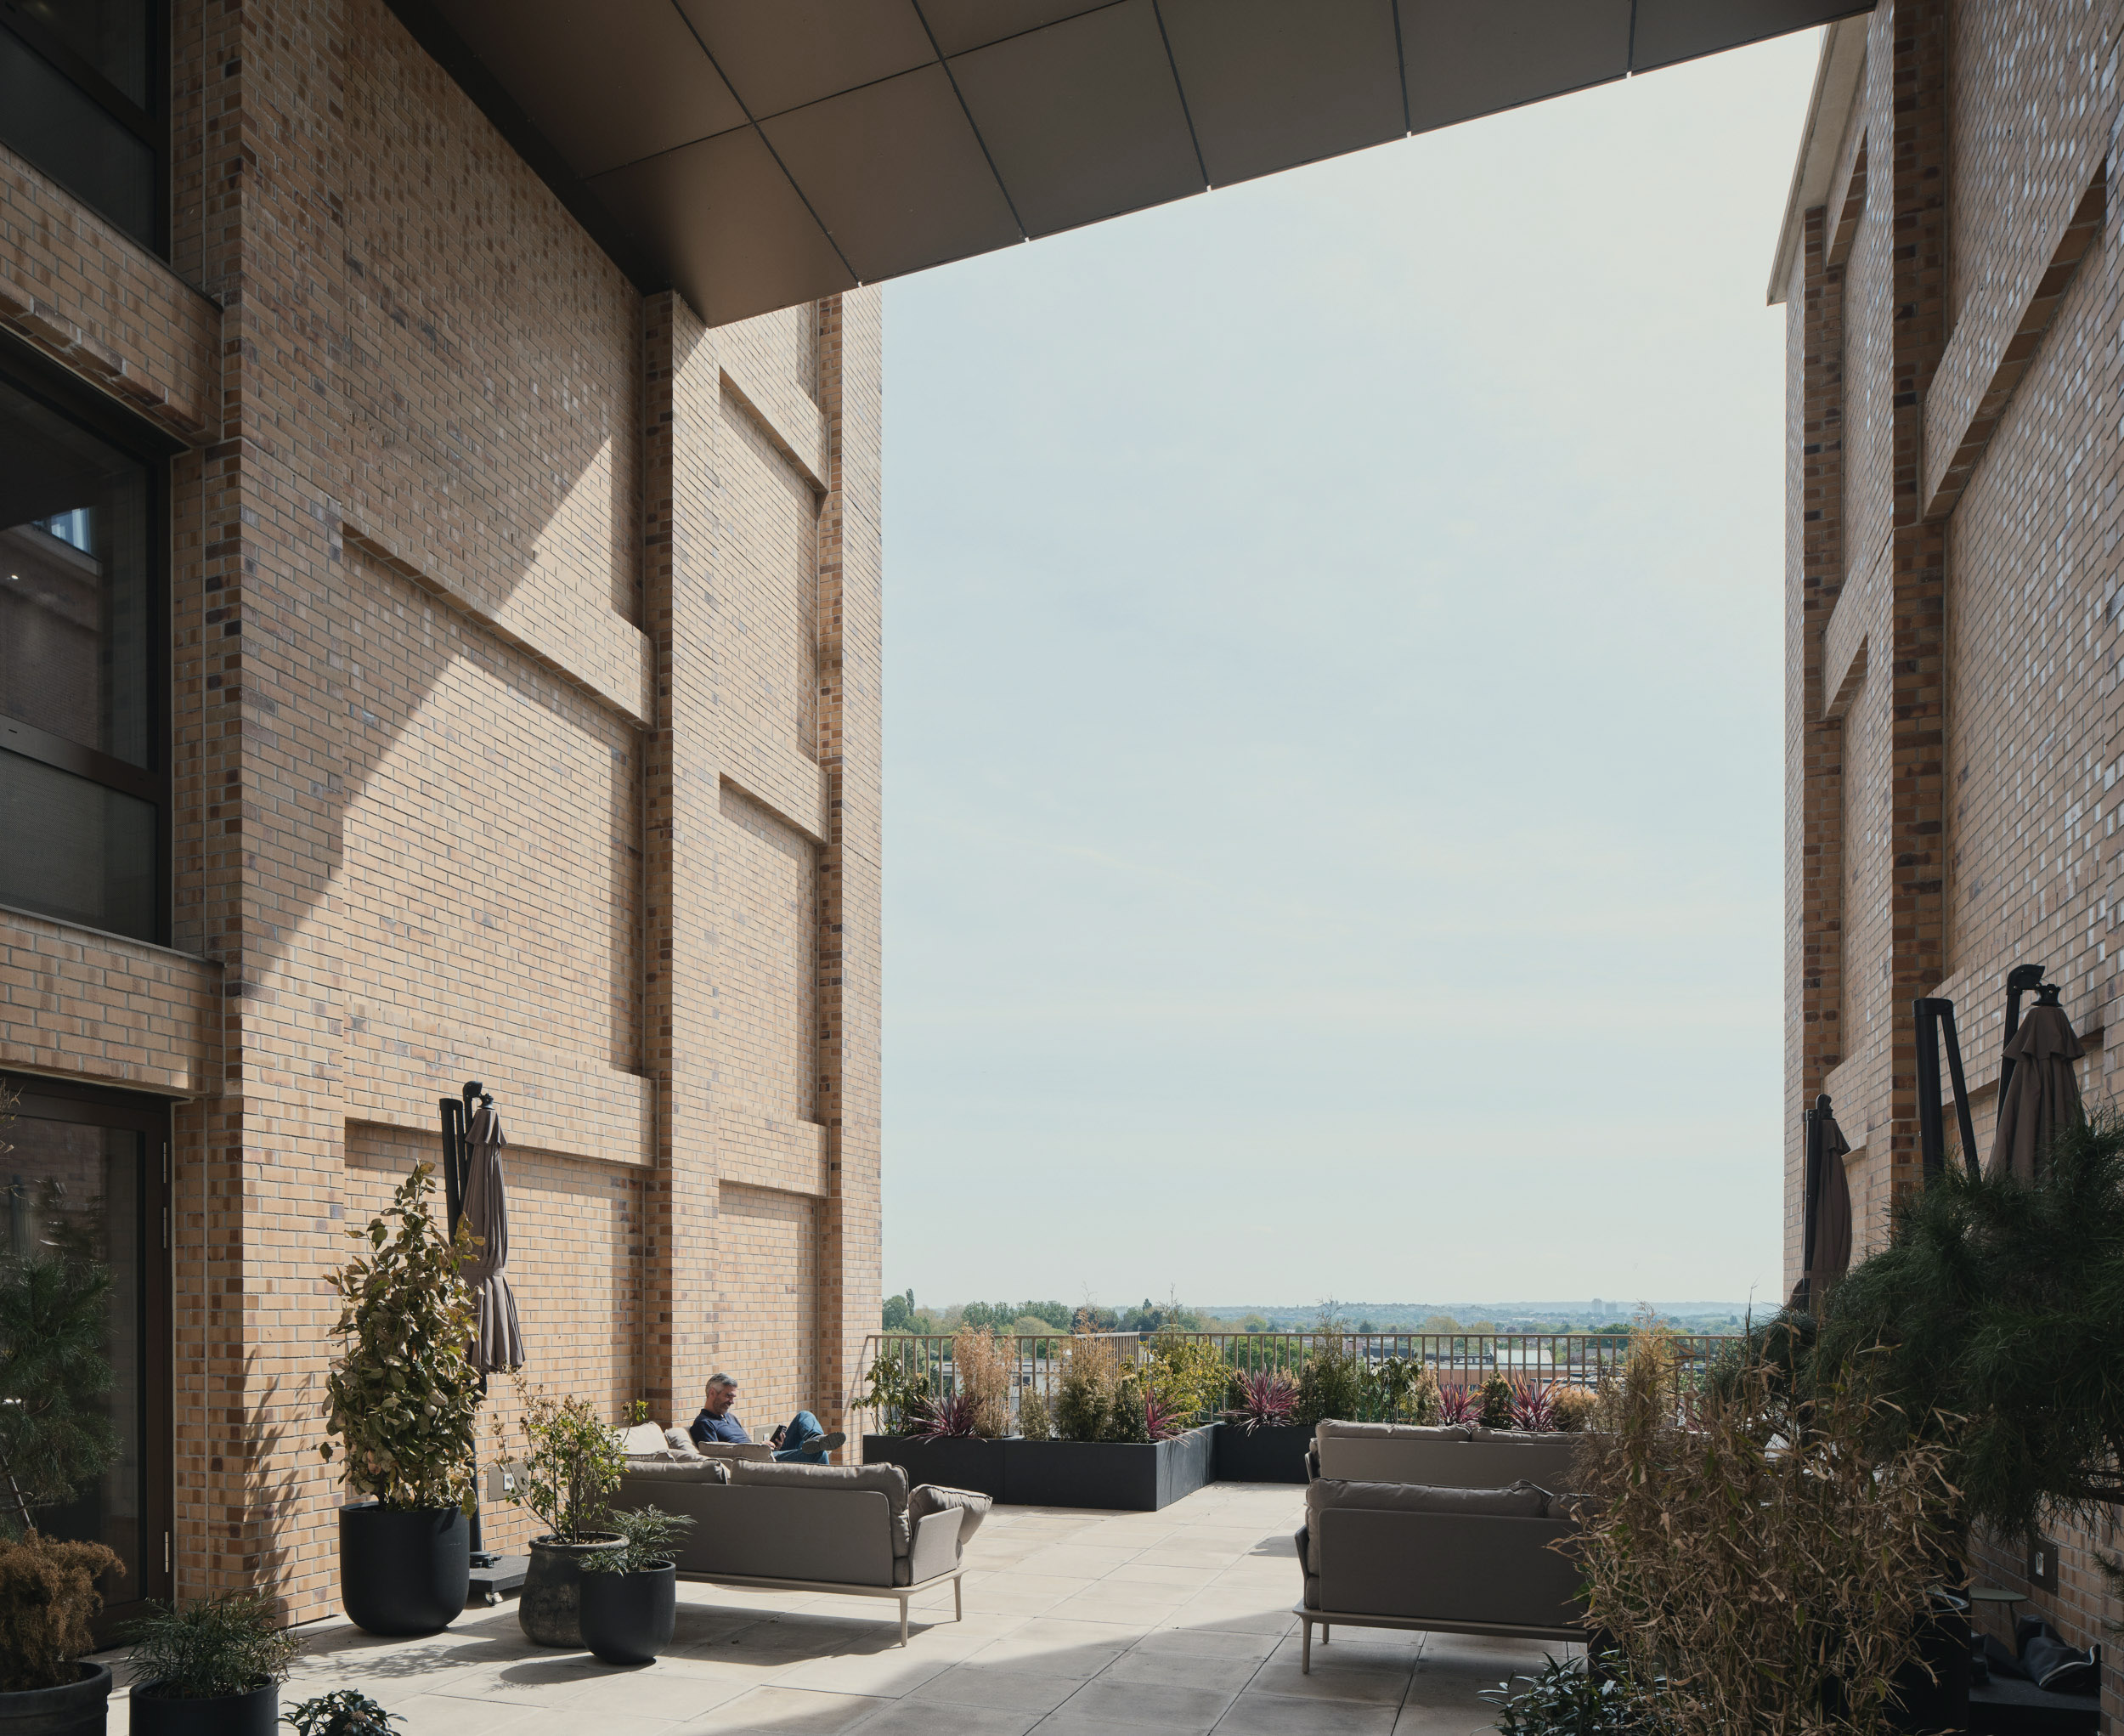 Exterior terrace photo showing seating and planting